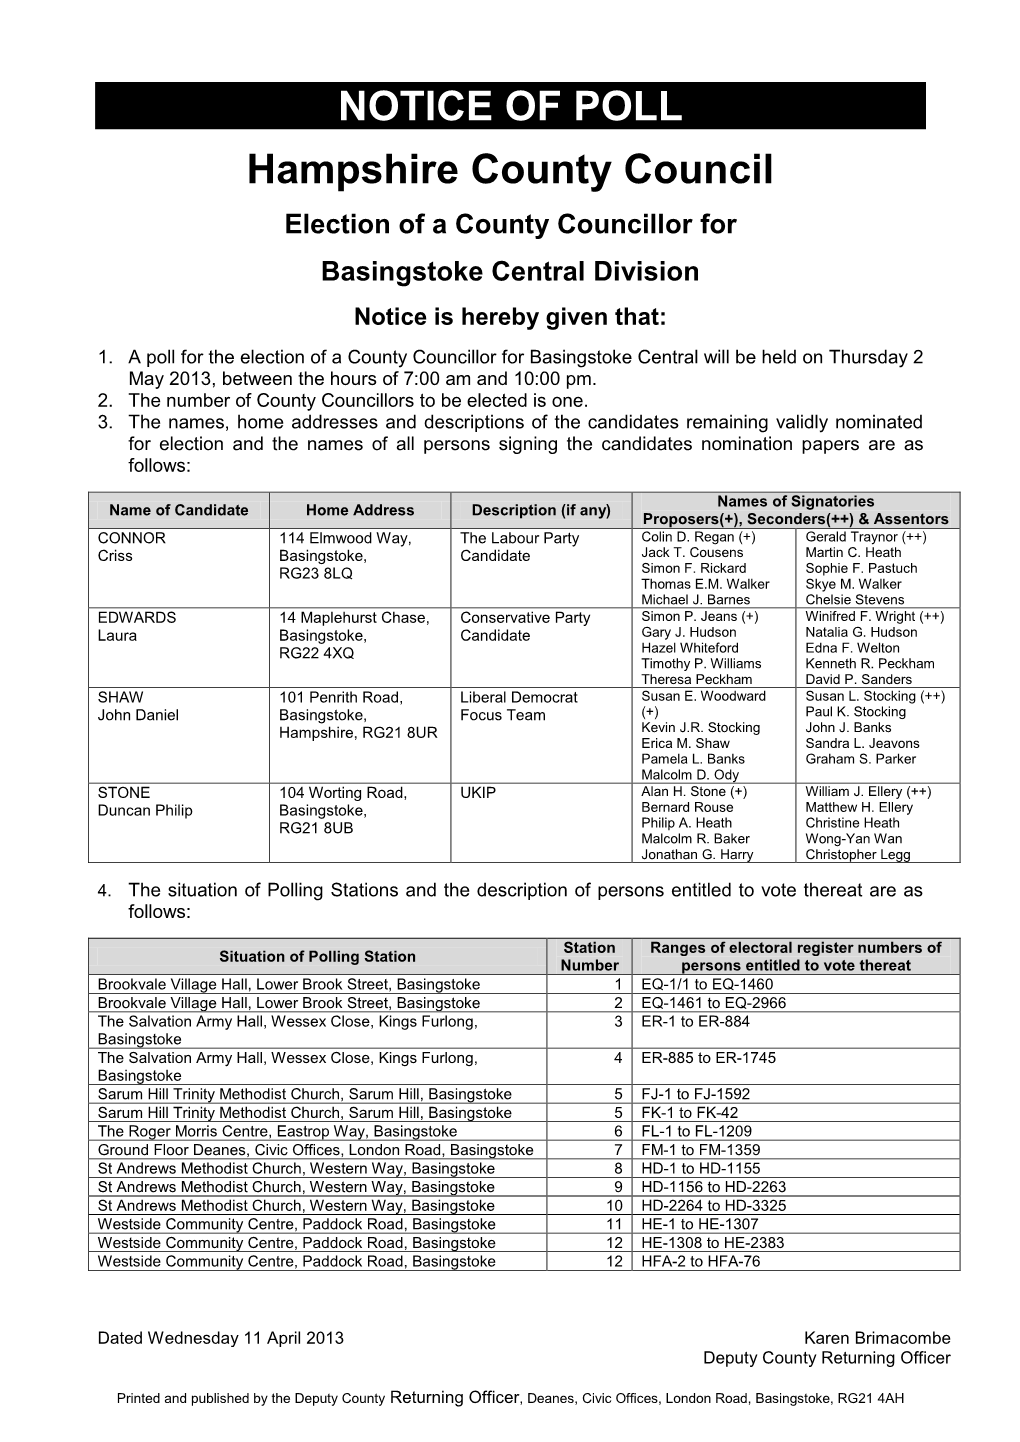 NOTICE of POLL Hampshire County Council Election of a Councillor for Basingstoke South East Division